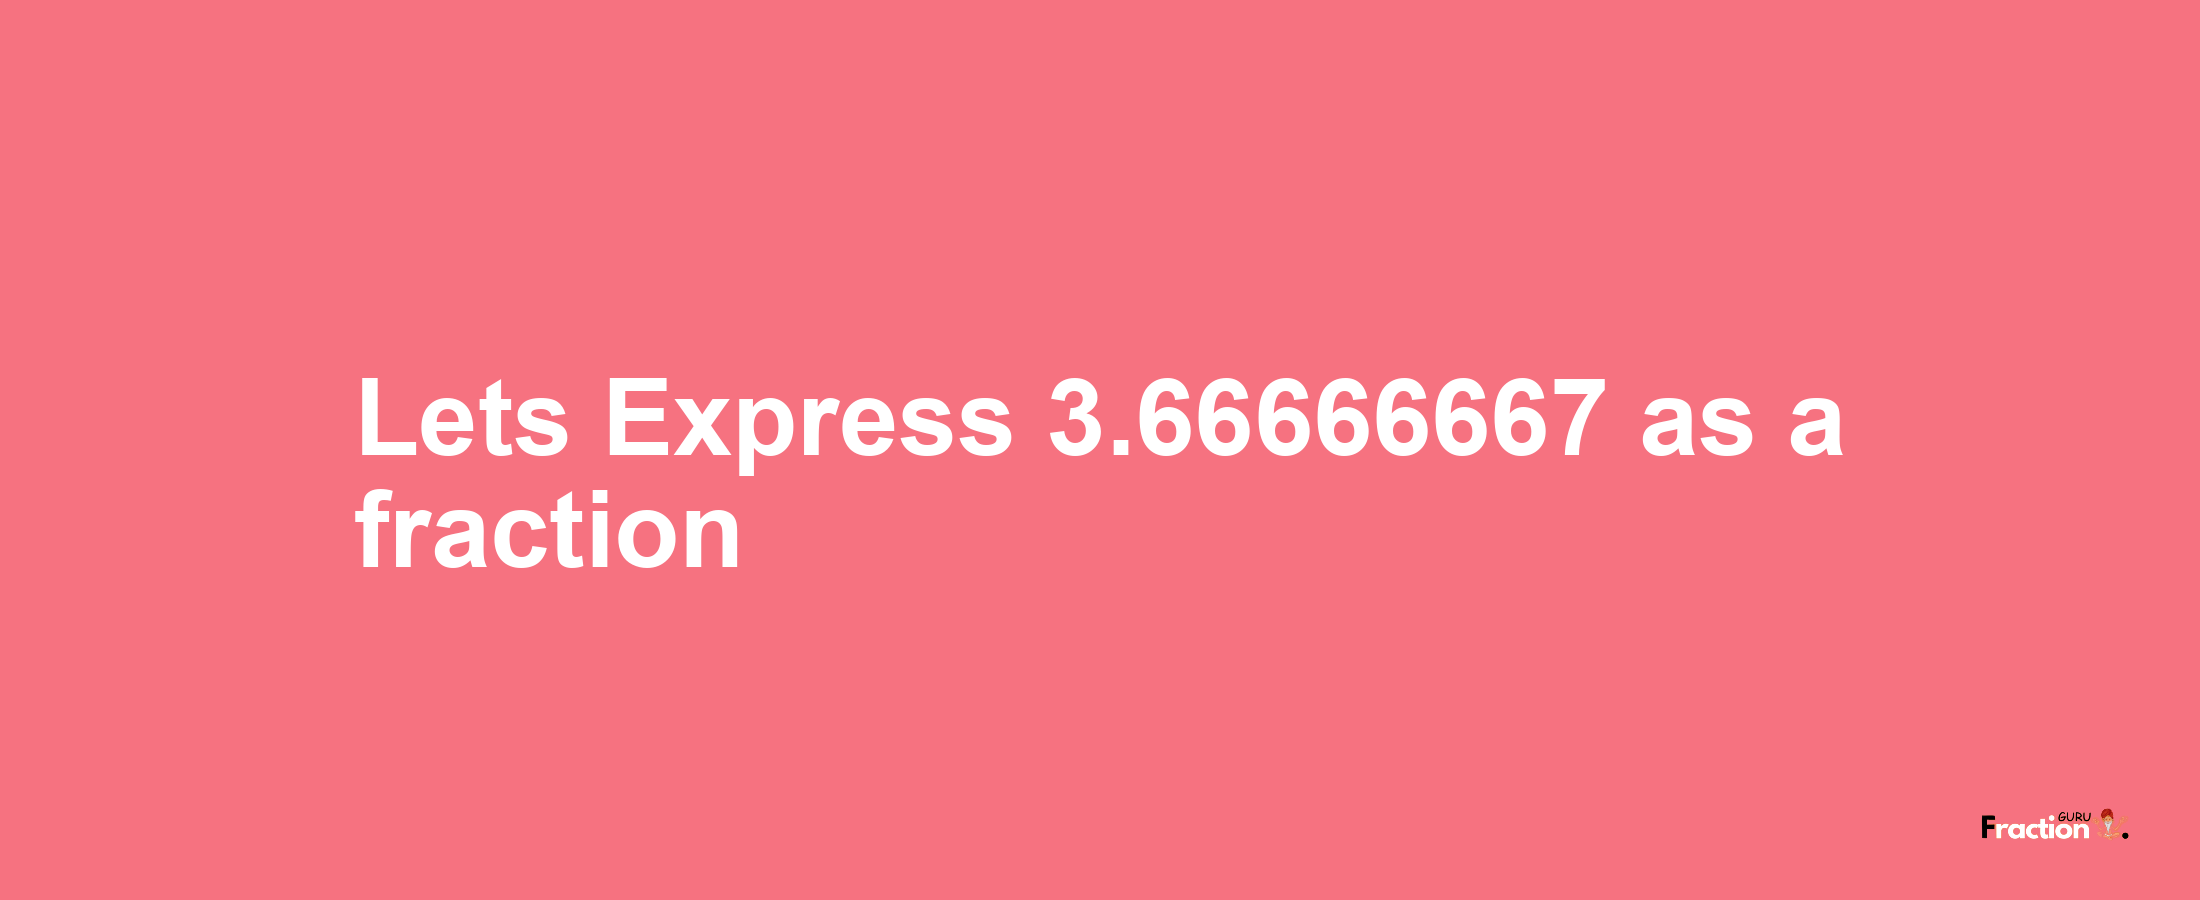 Lets Express 3.66666667 as afraction